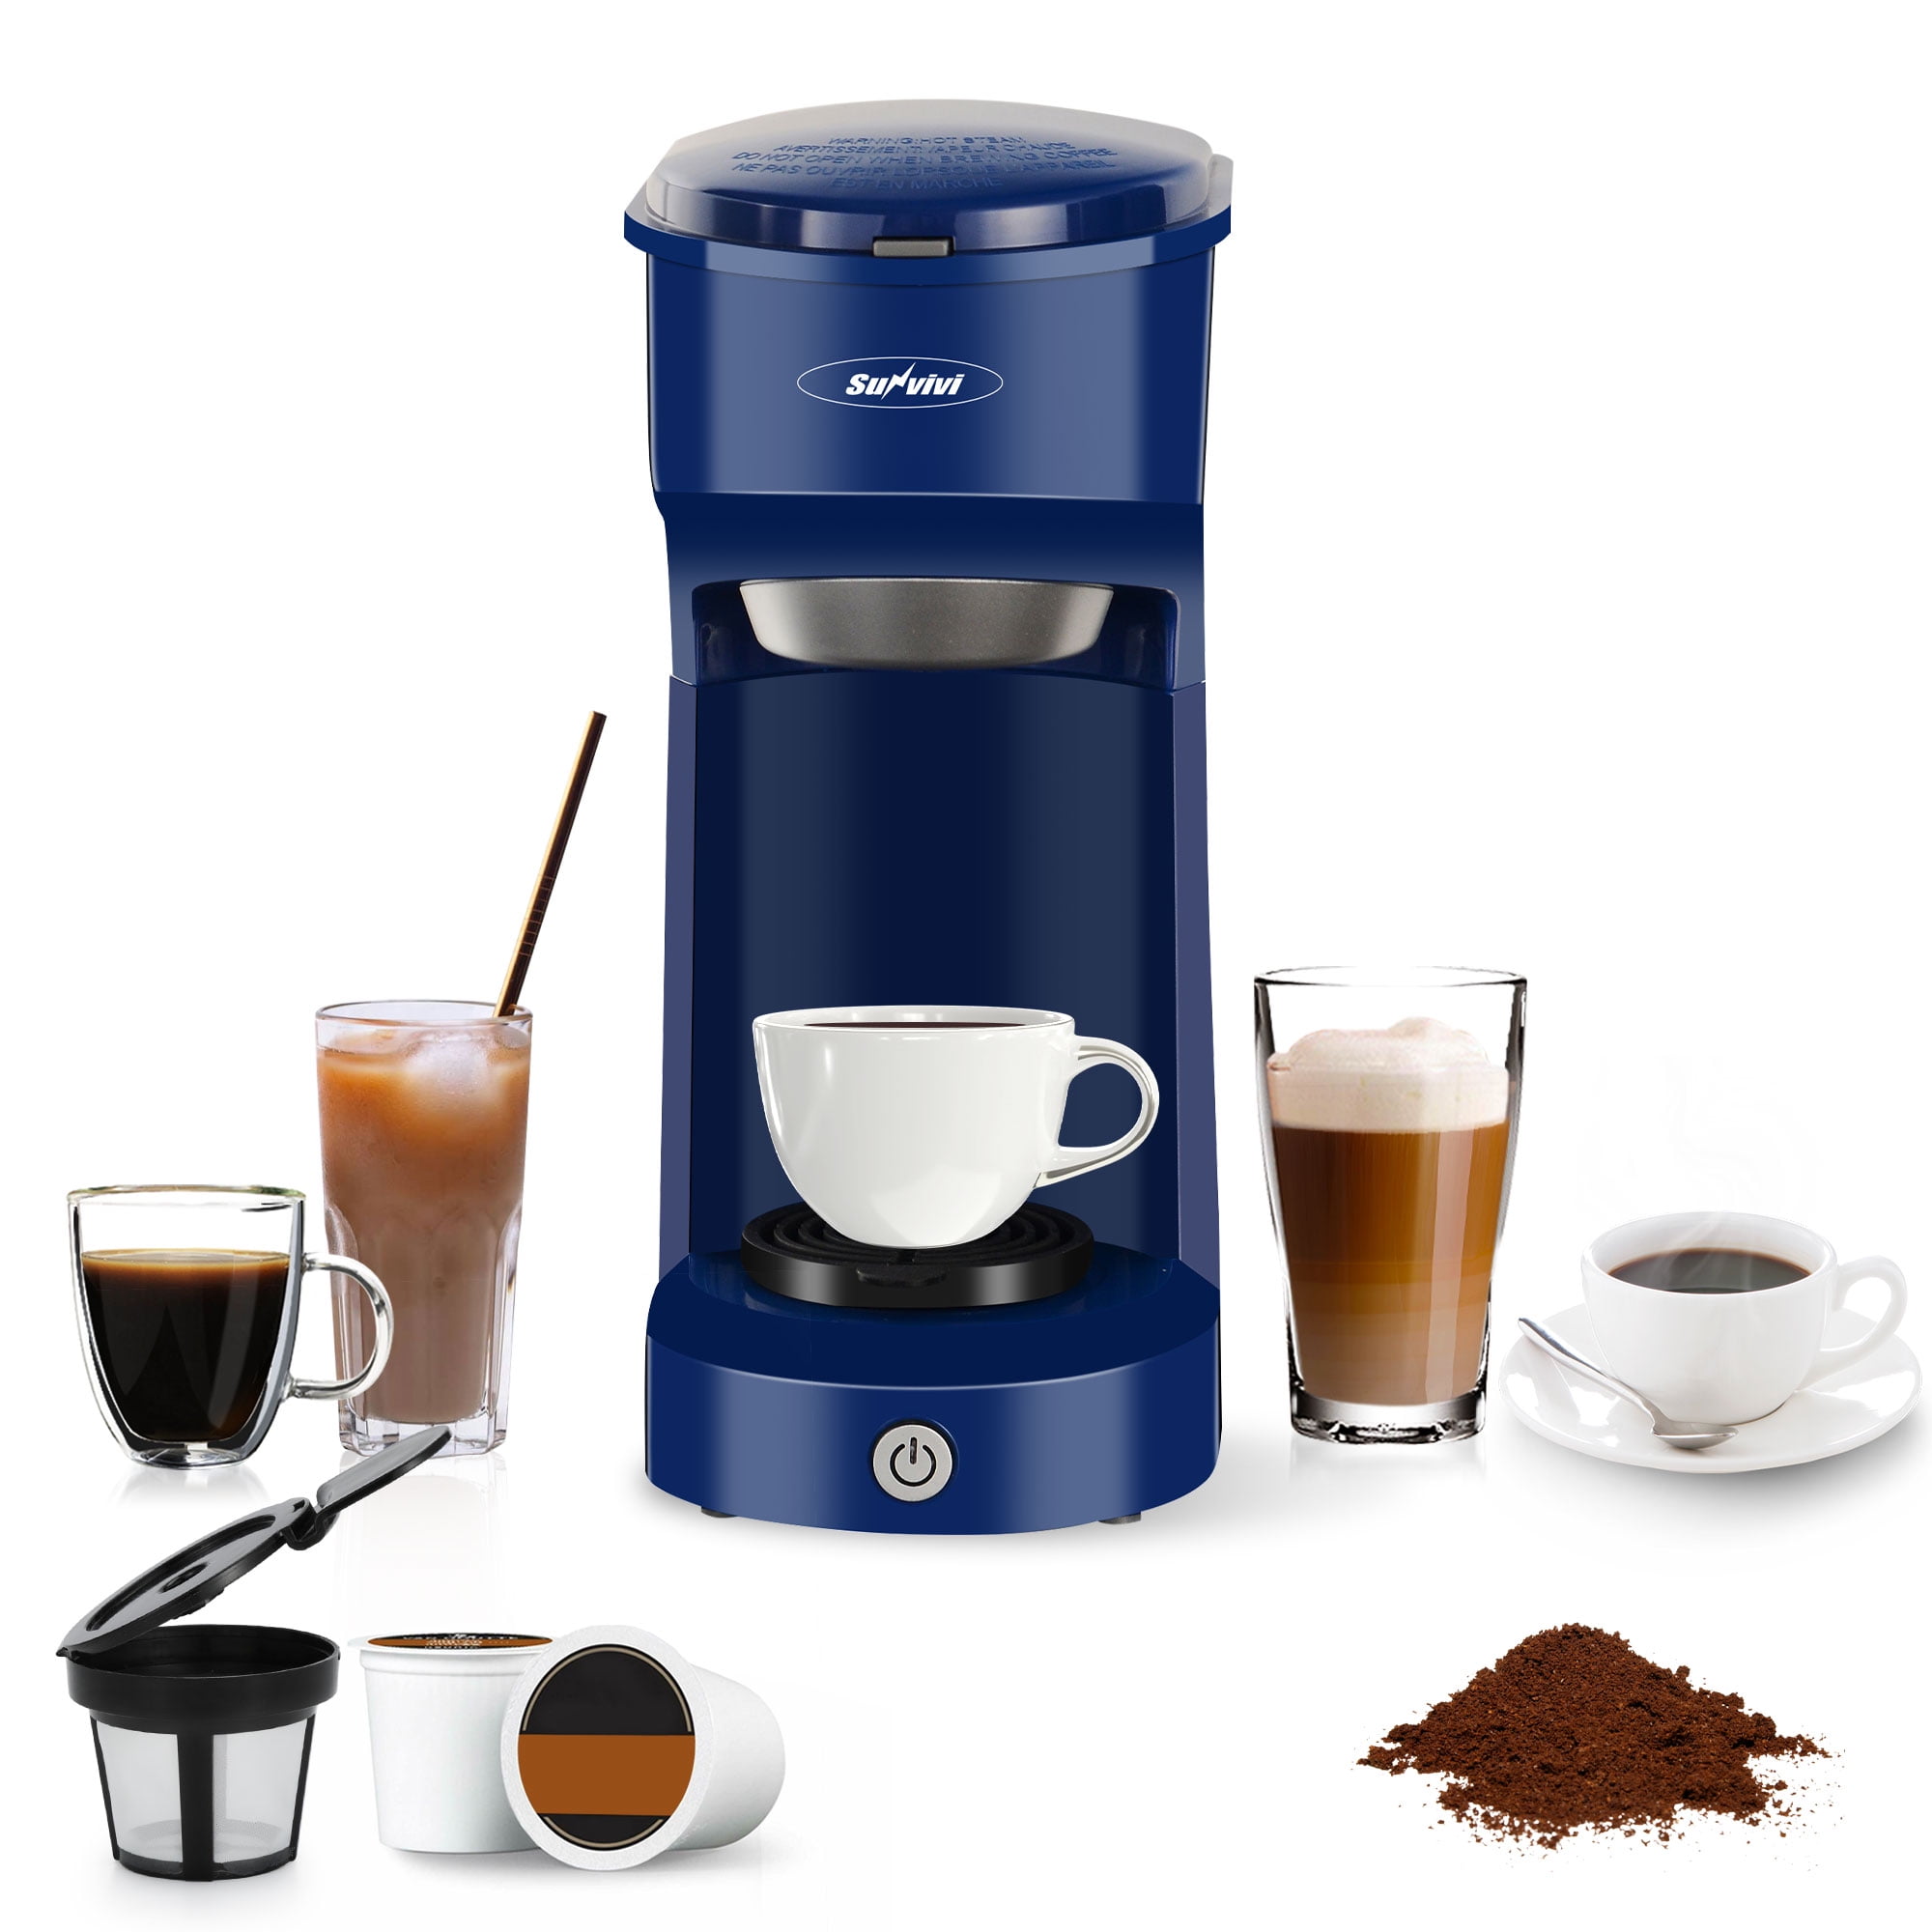 The 7 Best Single-Serve Coffee Makers of 2024